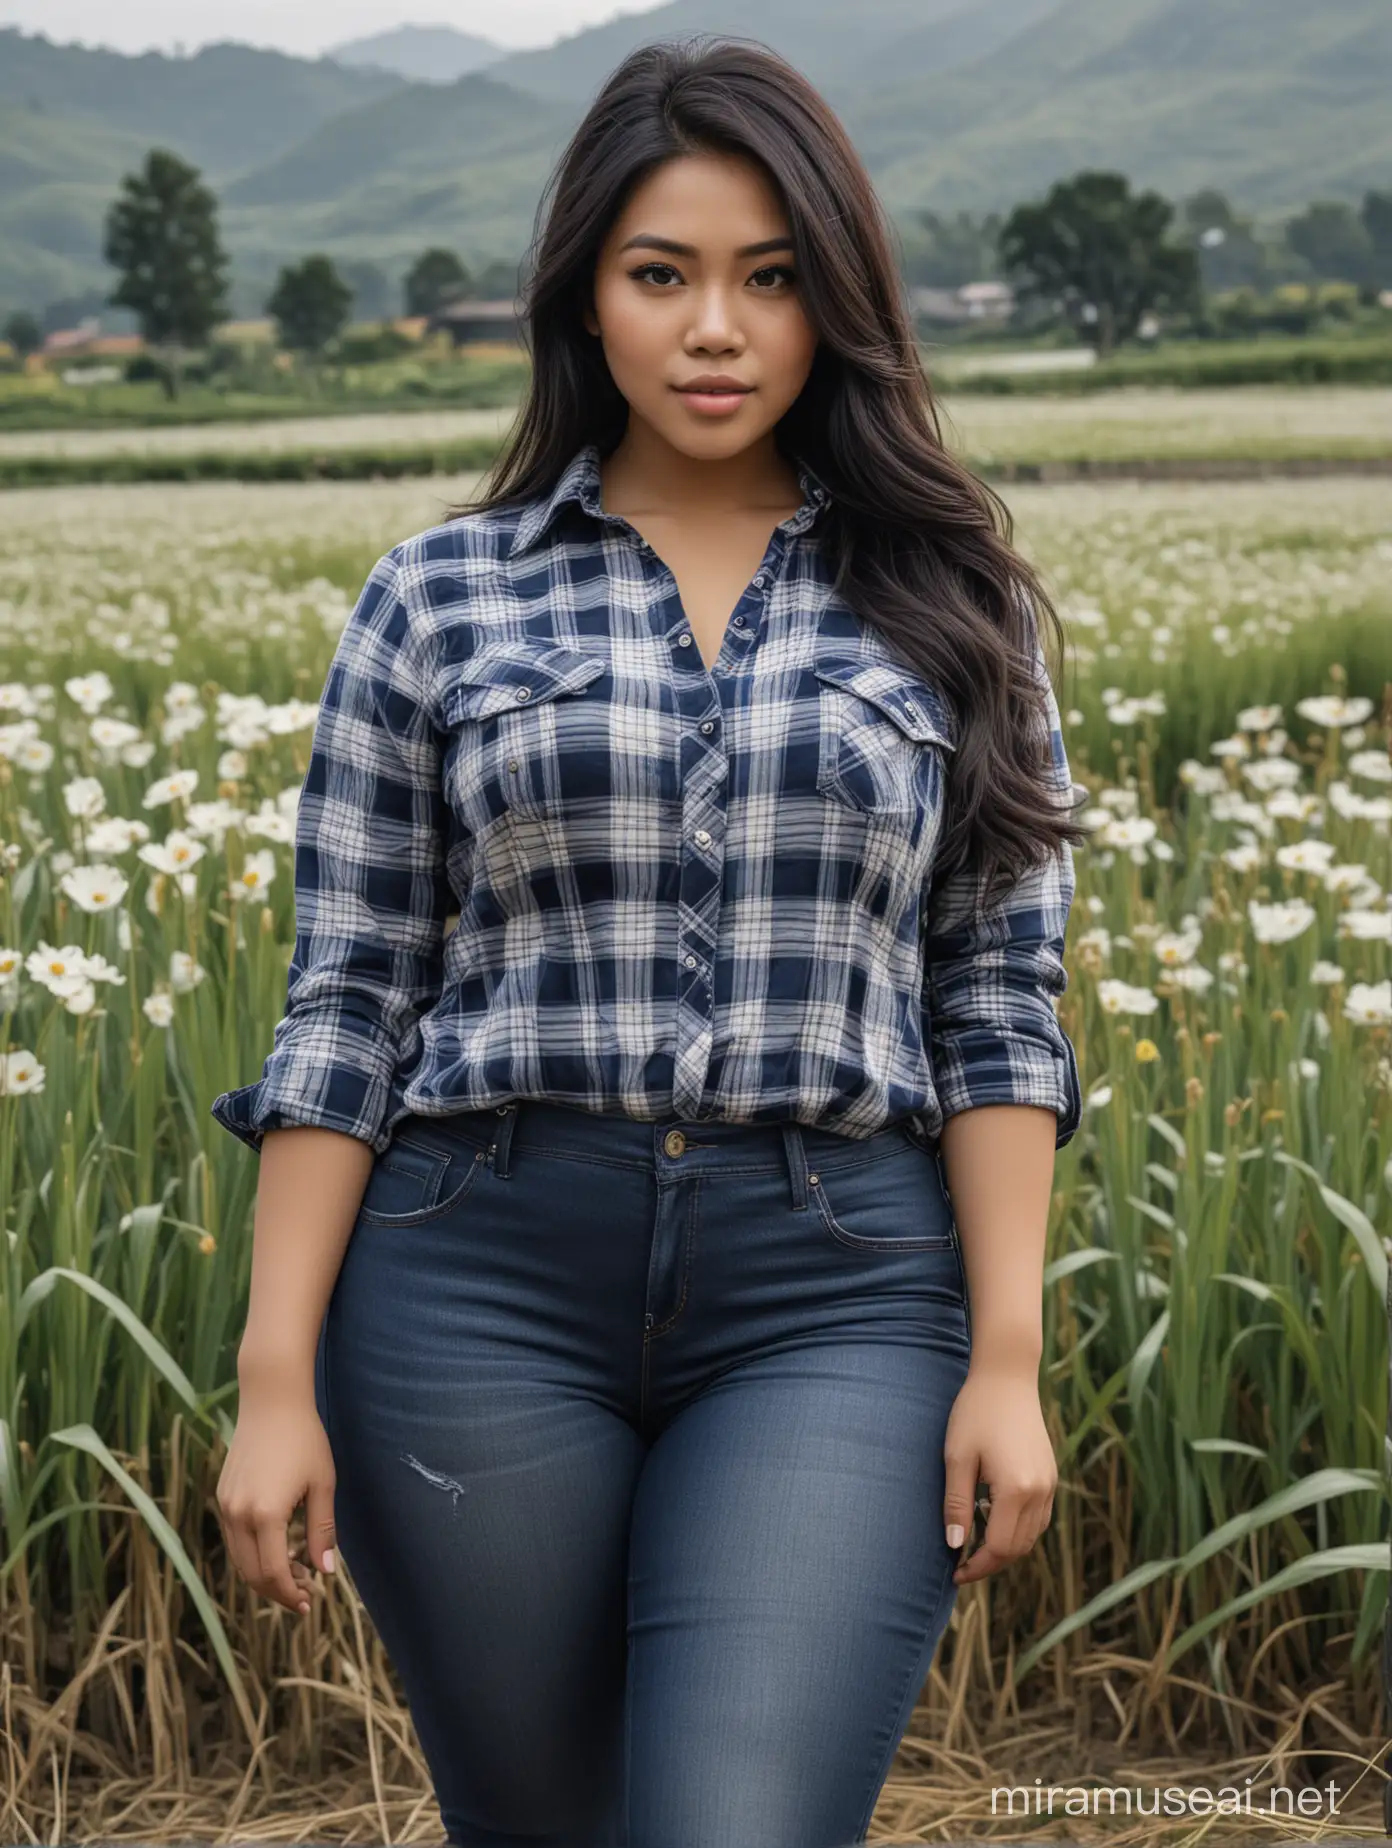 Stylish Indonesian Woman in Plaid Shirt Standing in Flower Garden